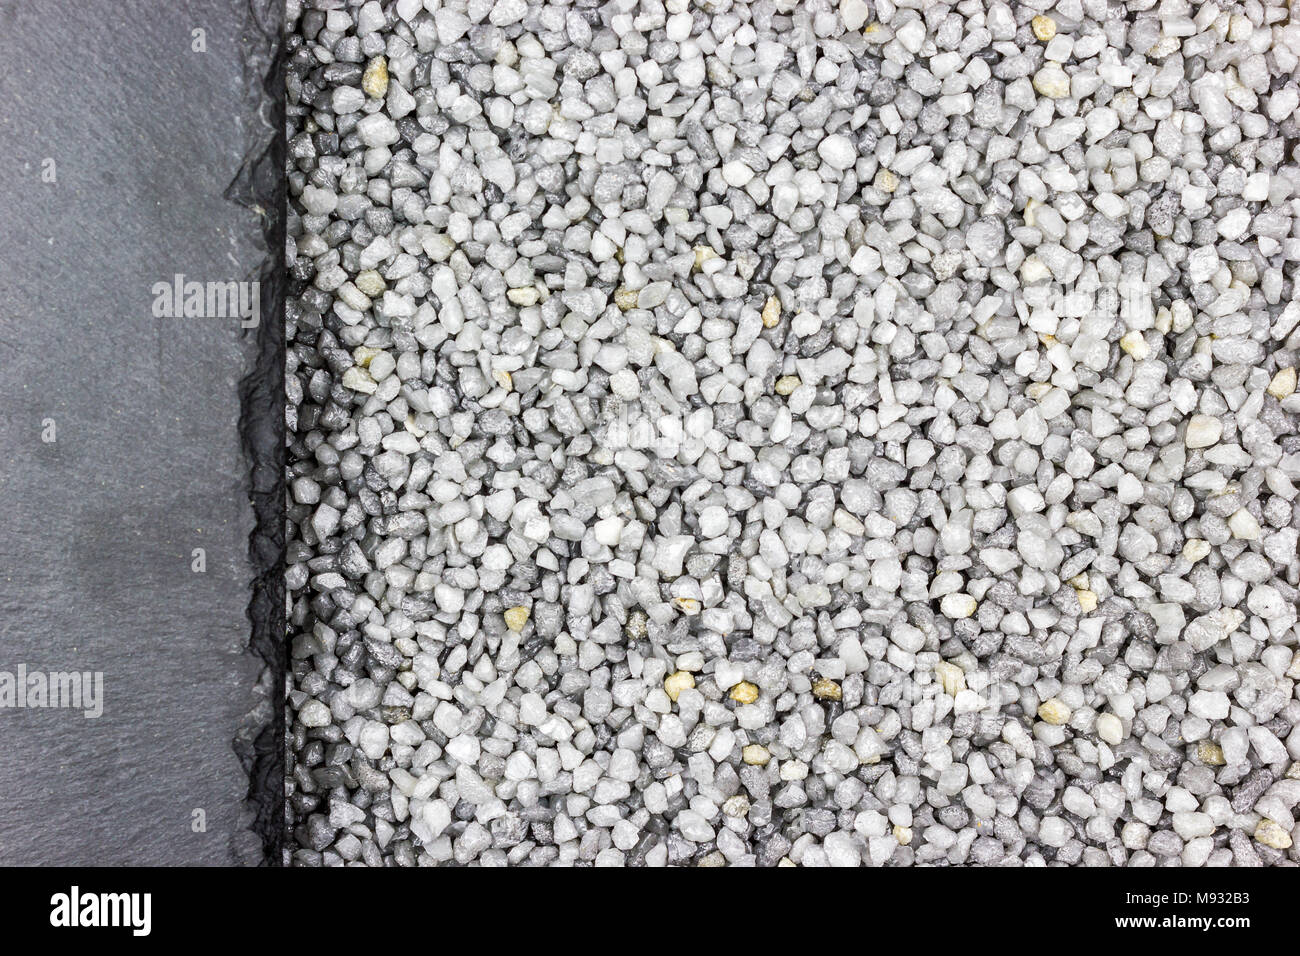 Grey fine gravel as background, place for text Stock Photo